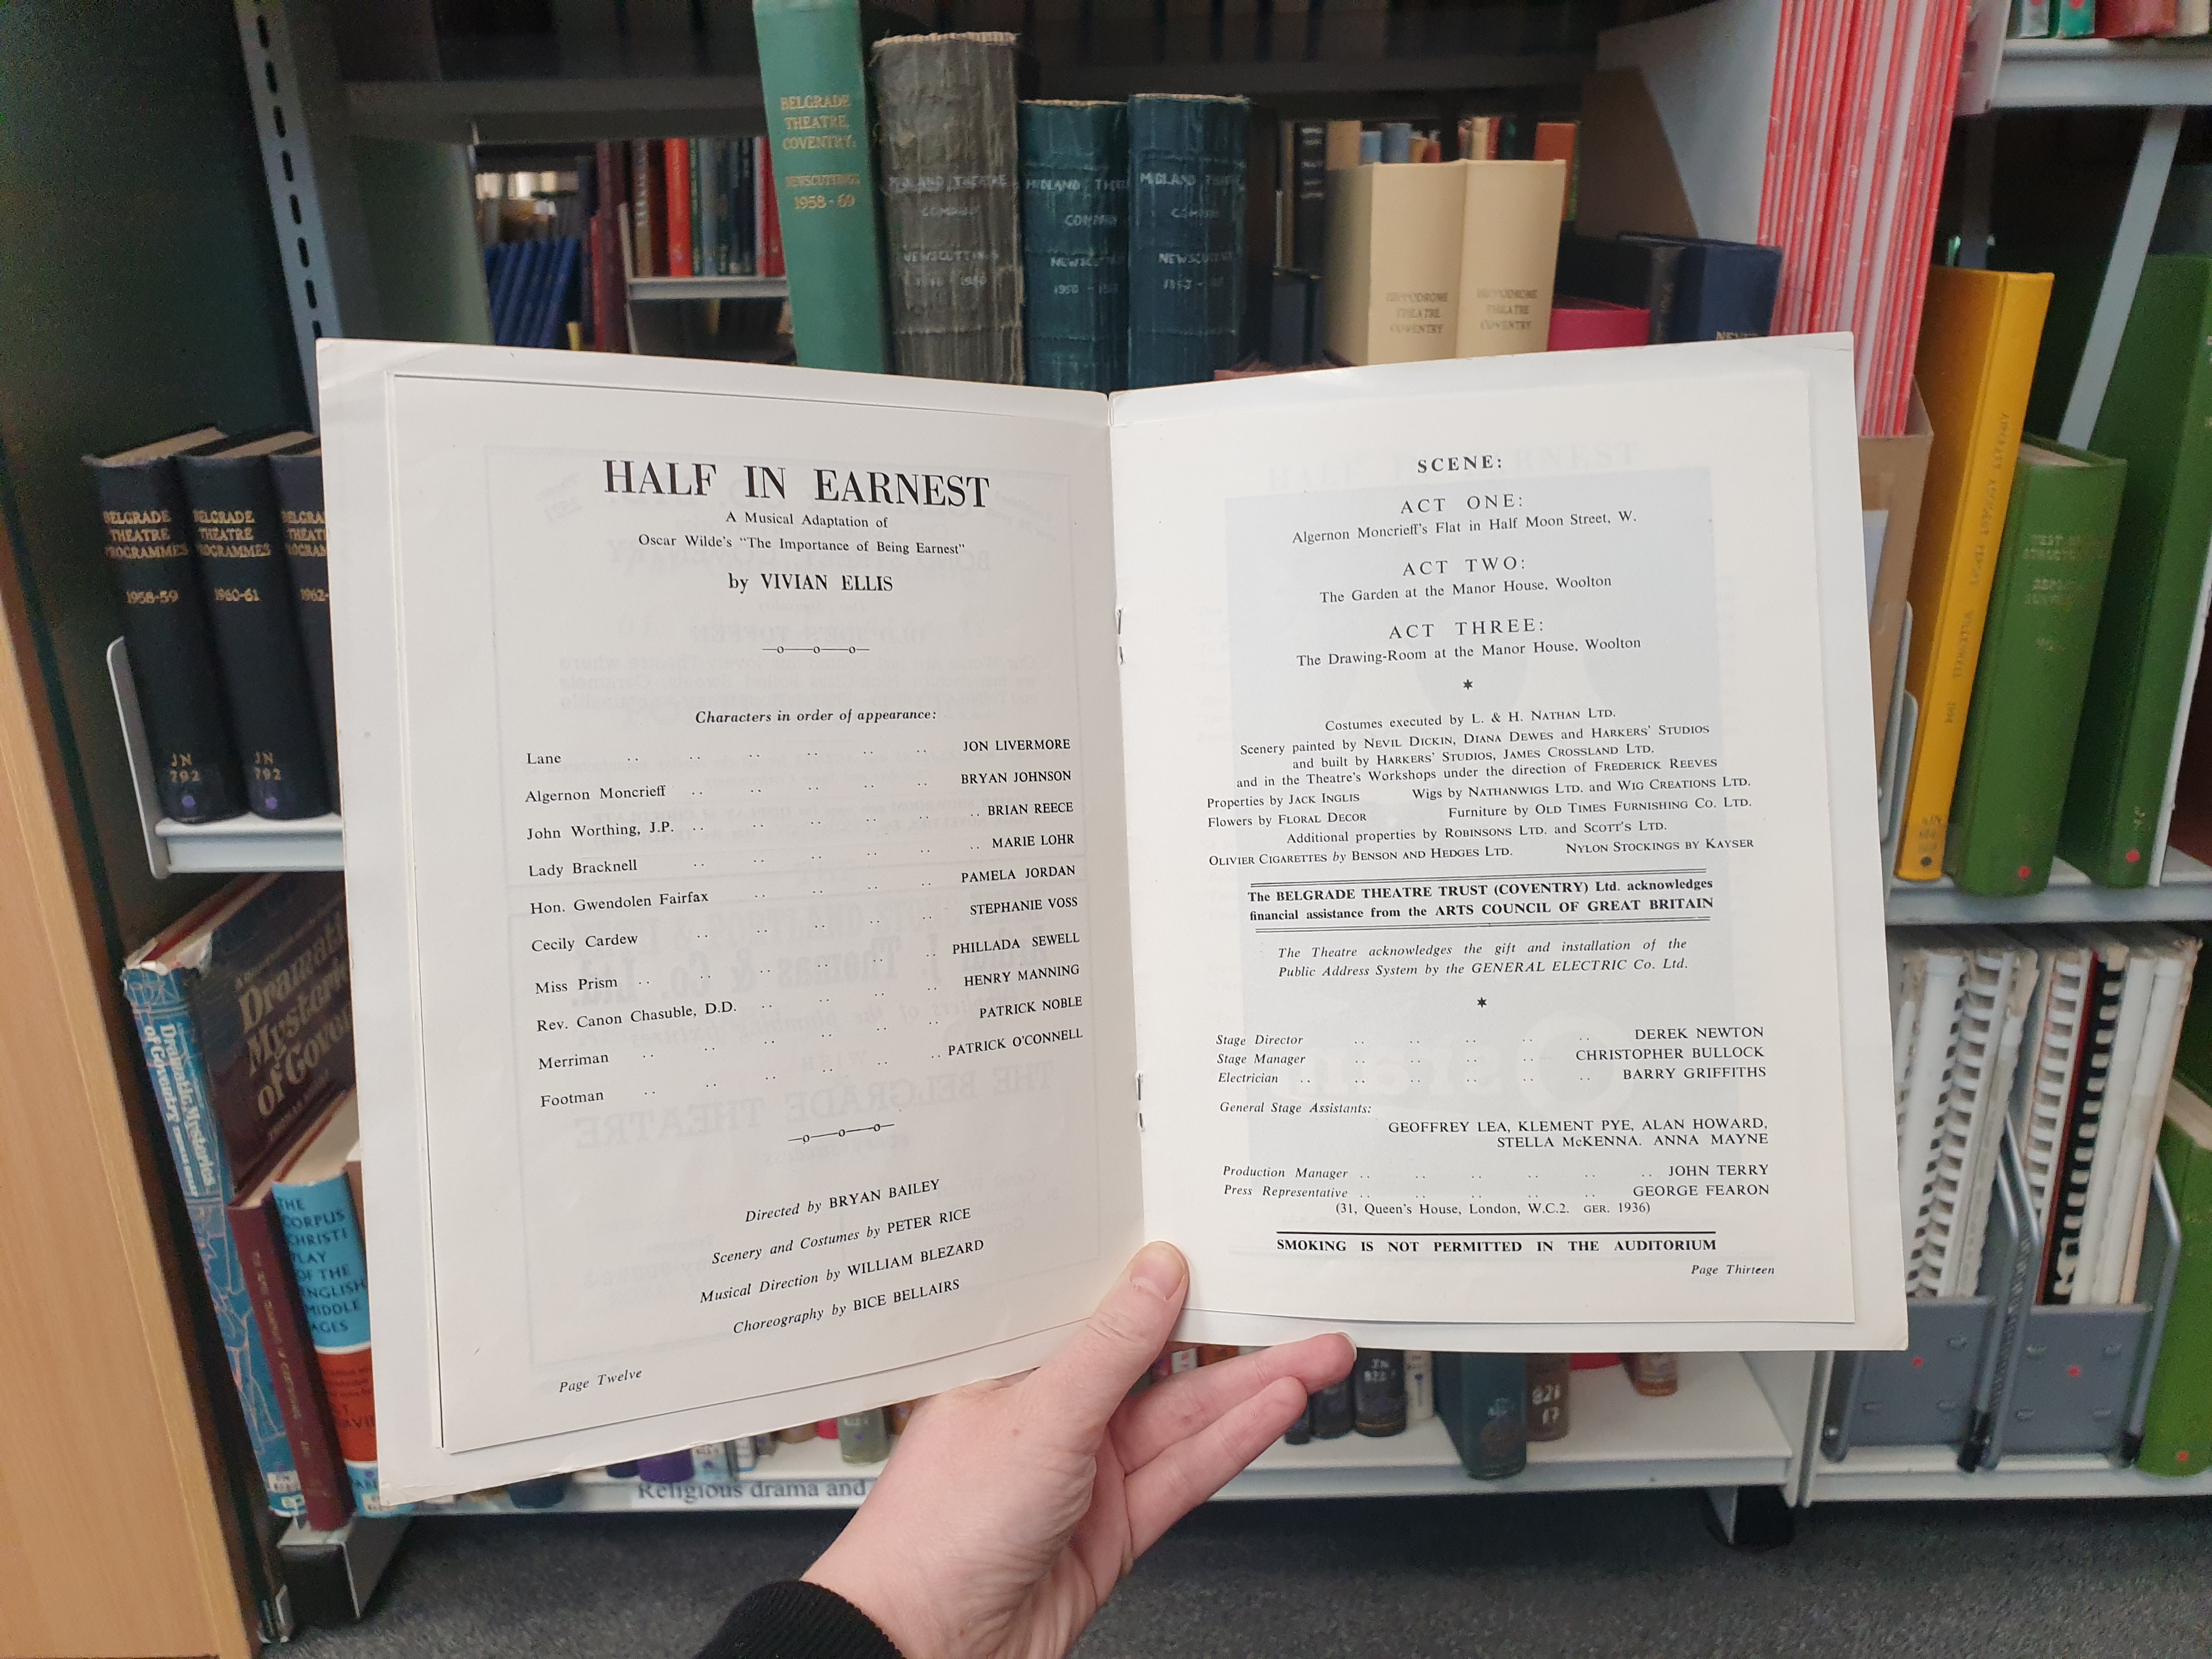 An open programme for Half in Earnest at the Belgrade Theatre featuring a list of cast and creatives and a scene breakdown. The programme is being held up in front of a bookcase in Coventry Archives